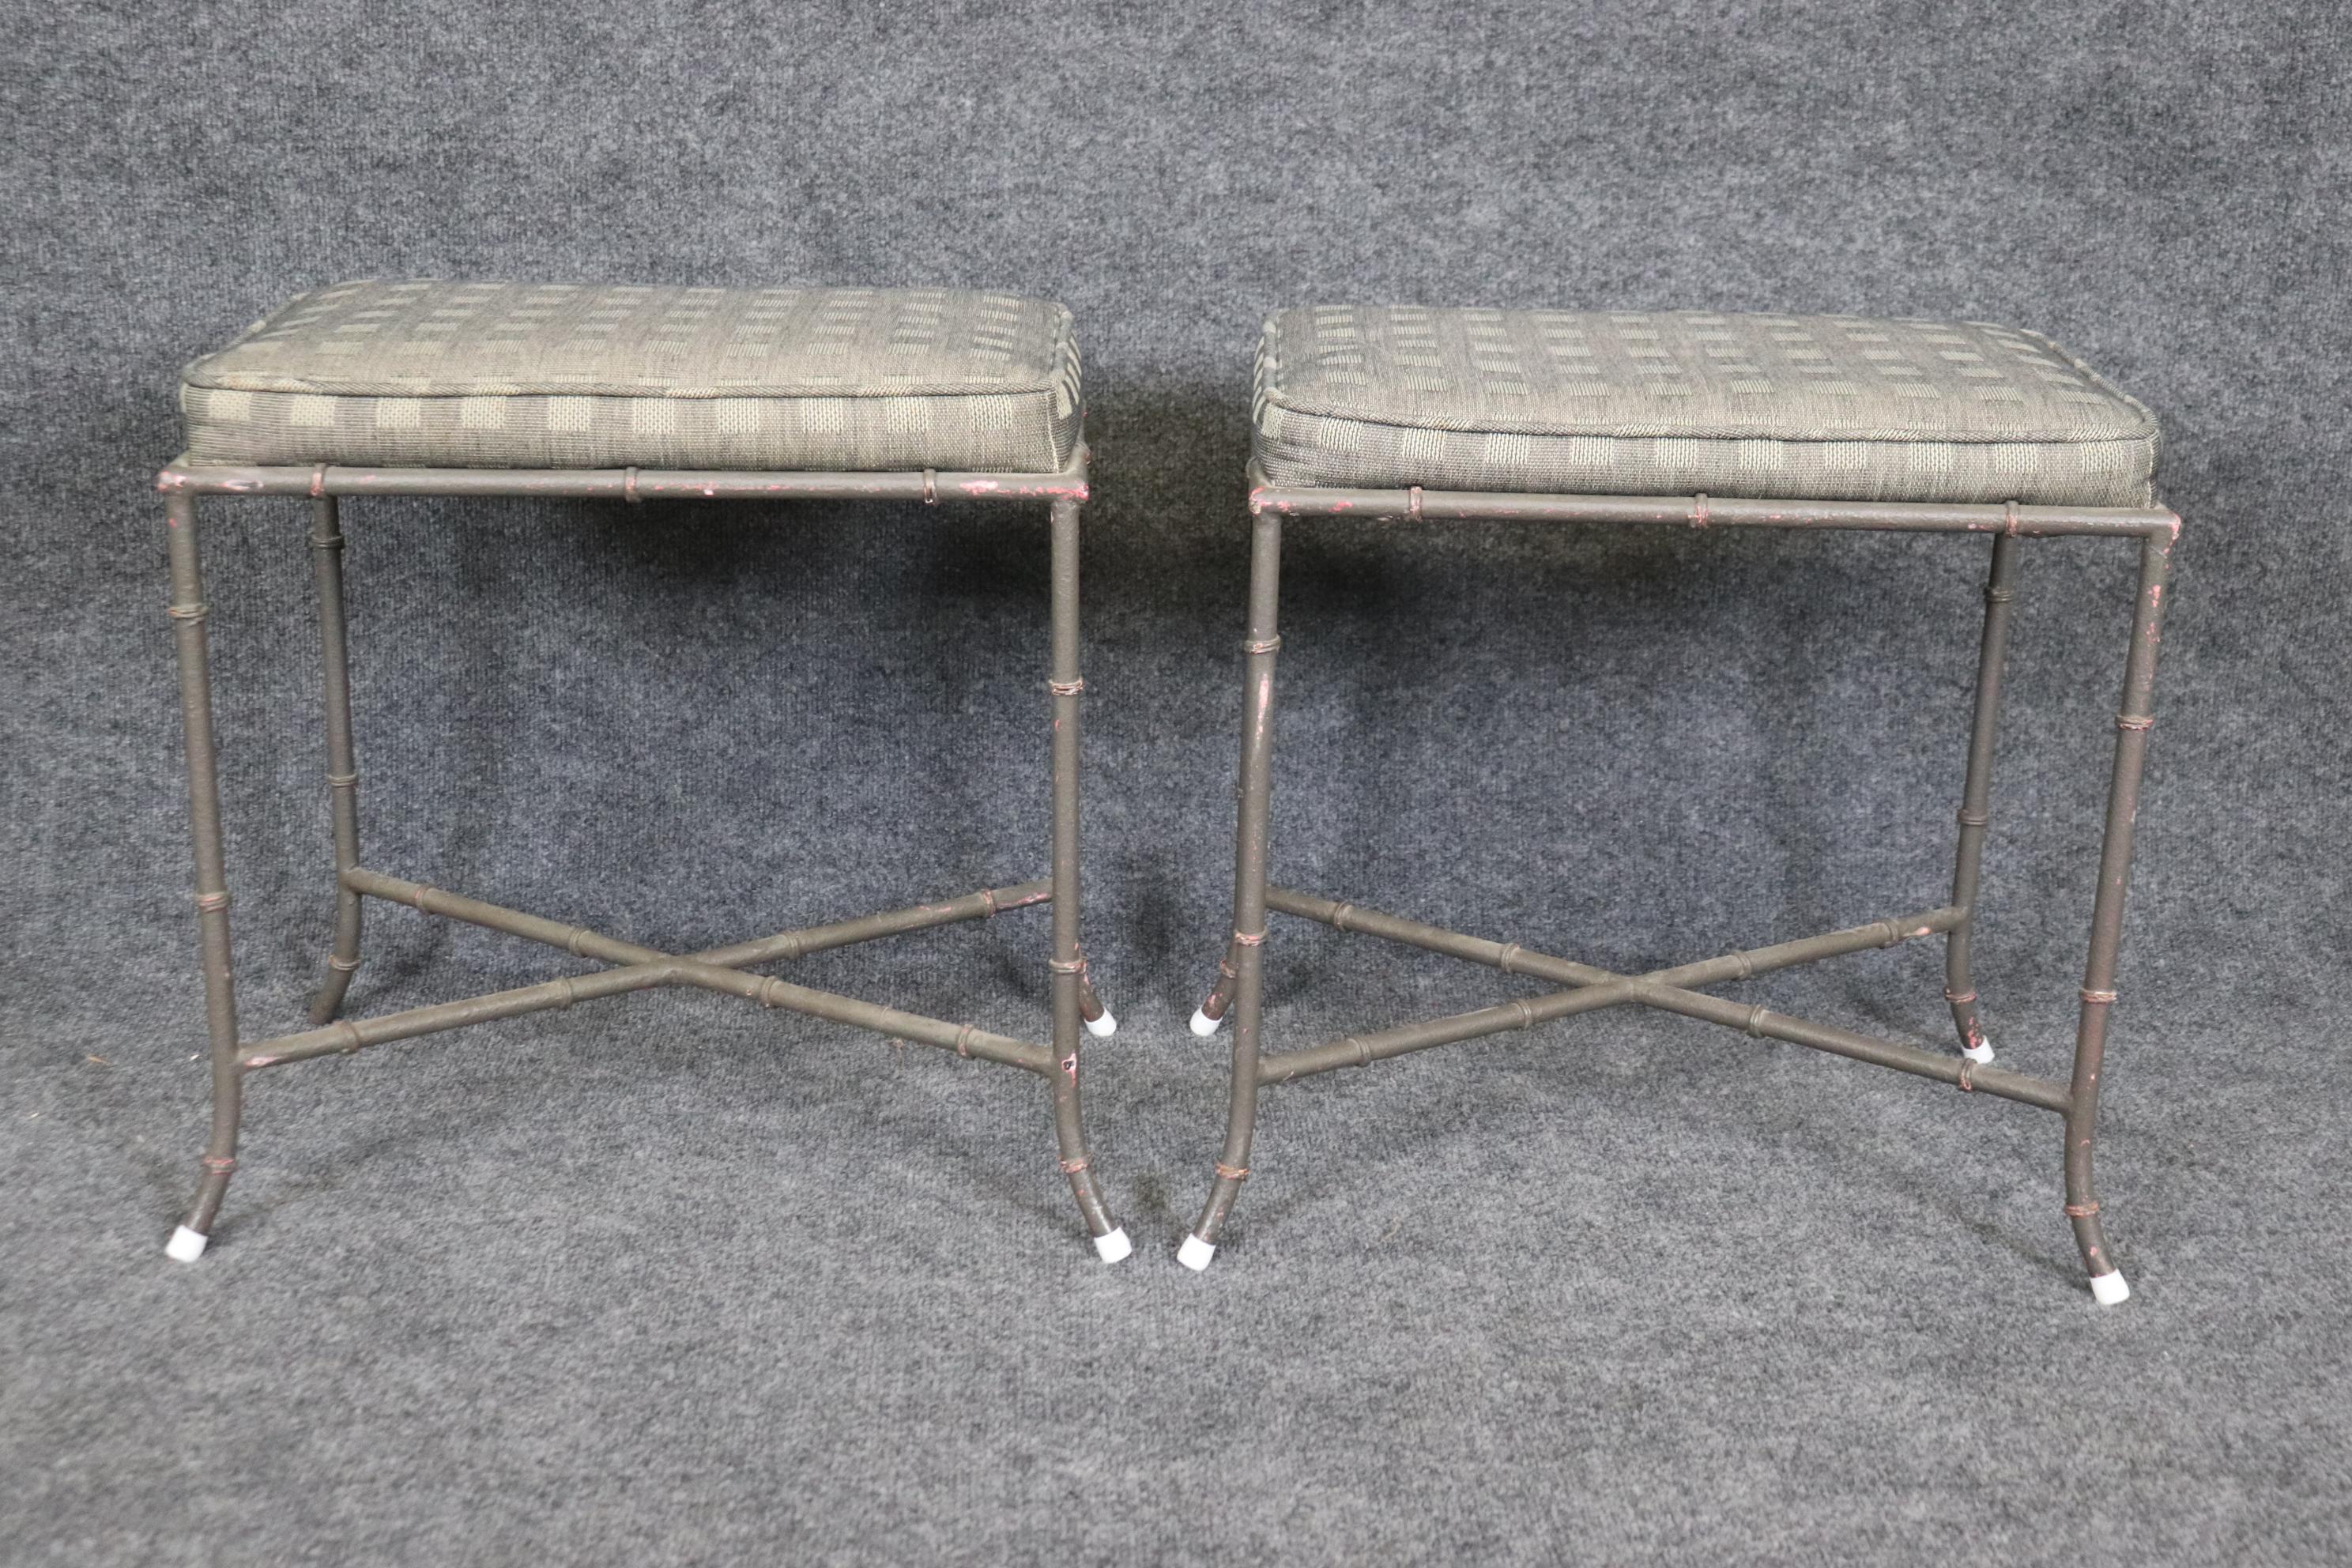 Nice pair of metal faux bamboo Maison Bagues style rectangular benches. The benches have plastic white toe caps to protect the floor. We can see one is missing. They are in good vintage condition. Measures 19 tall x 18 wide x 12 deep and dates to